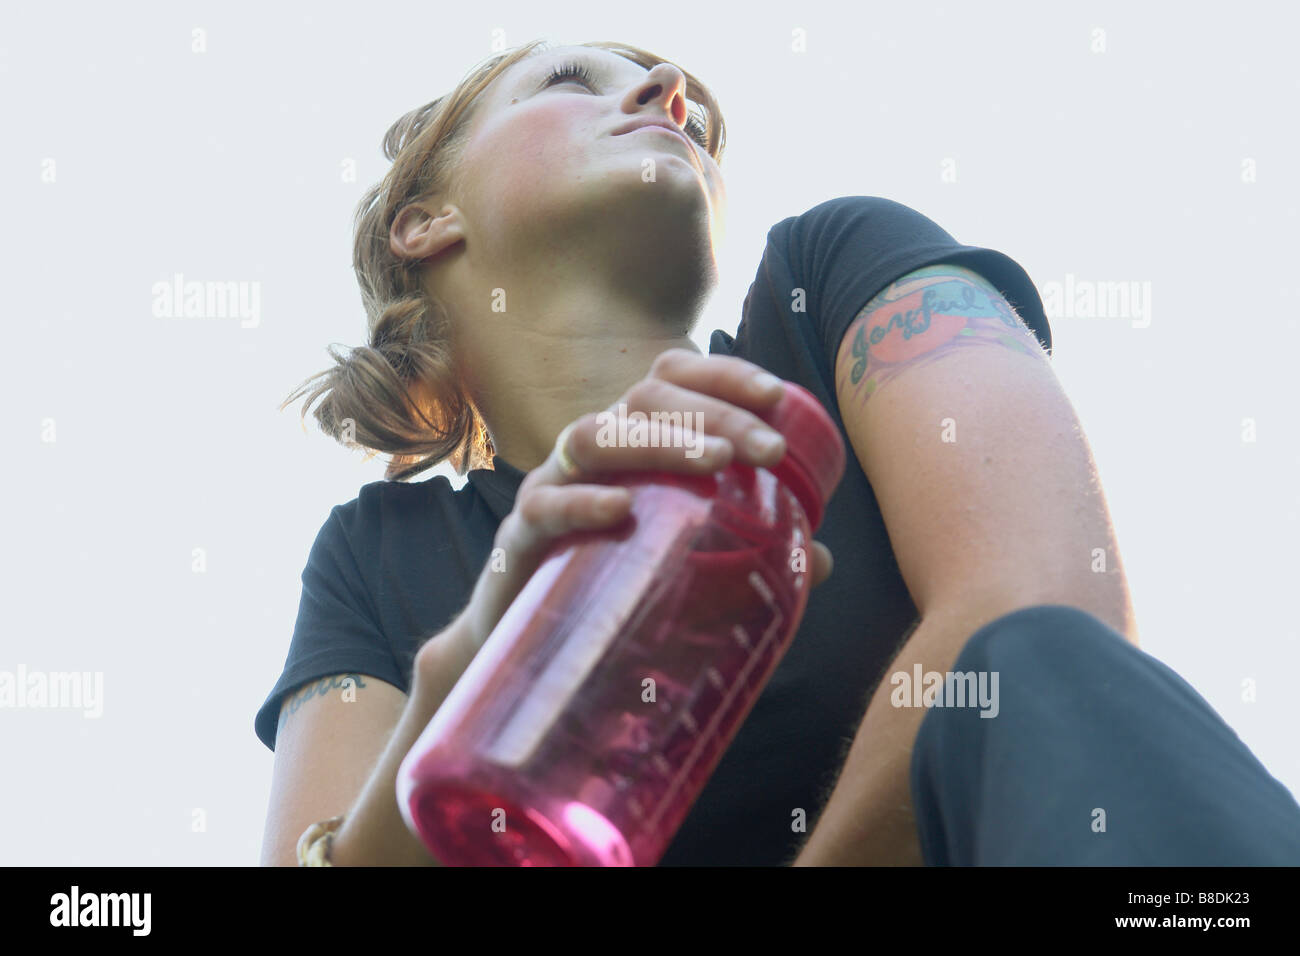 Low angle portrait of woman with re-useable water bottle Stock Photo